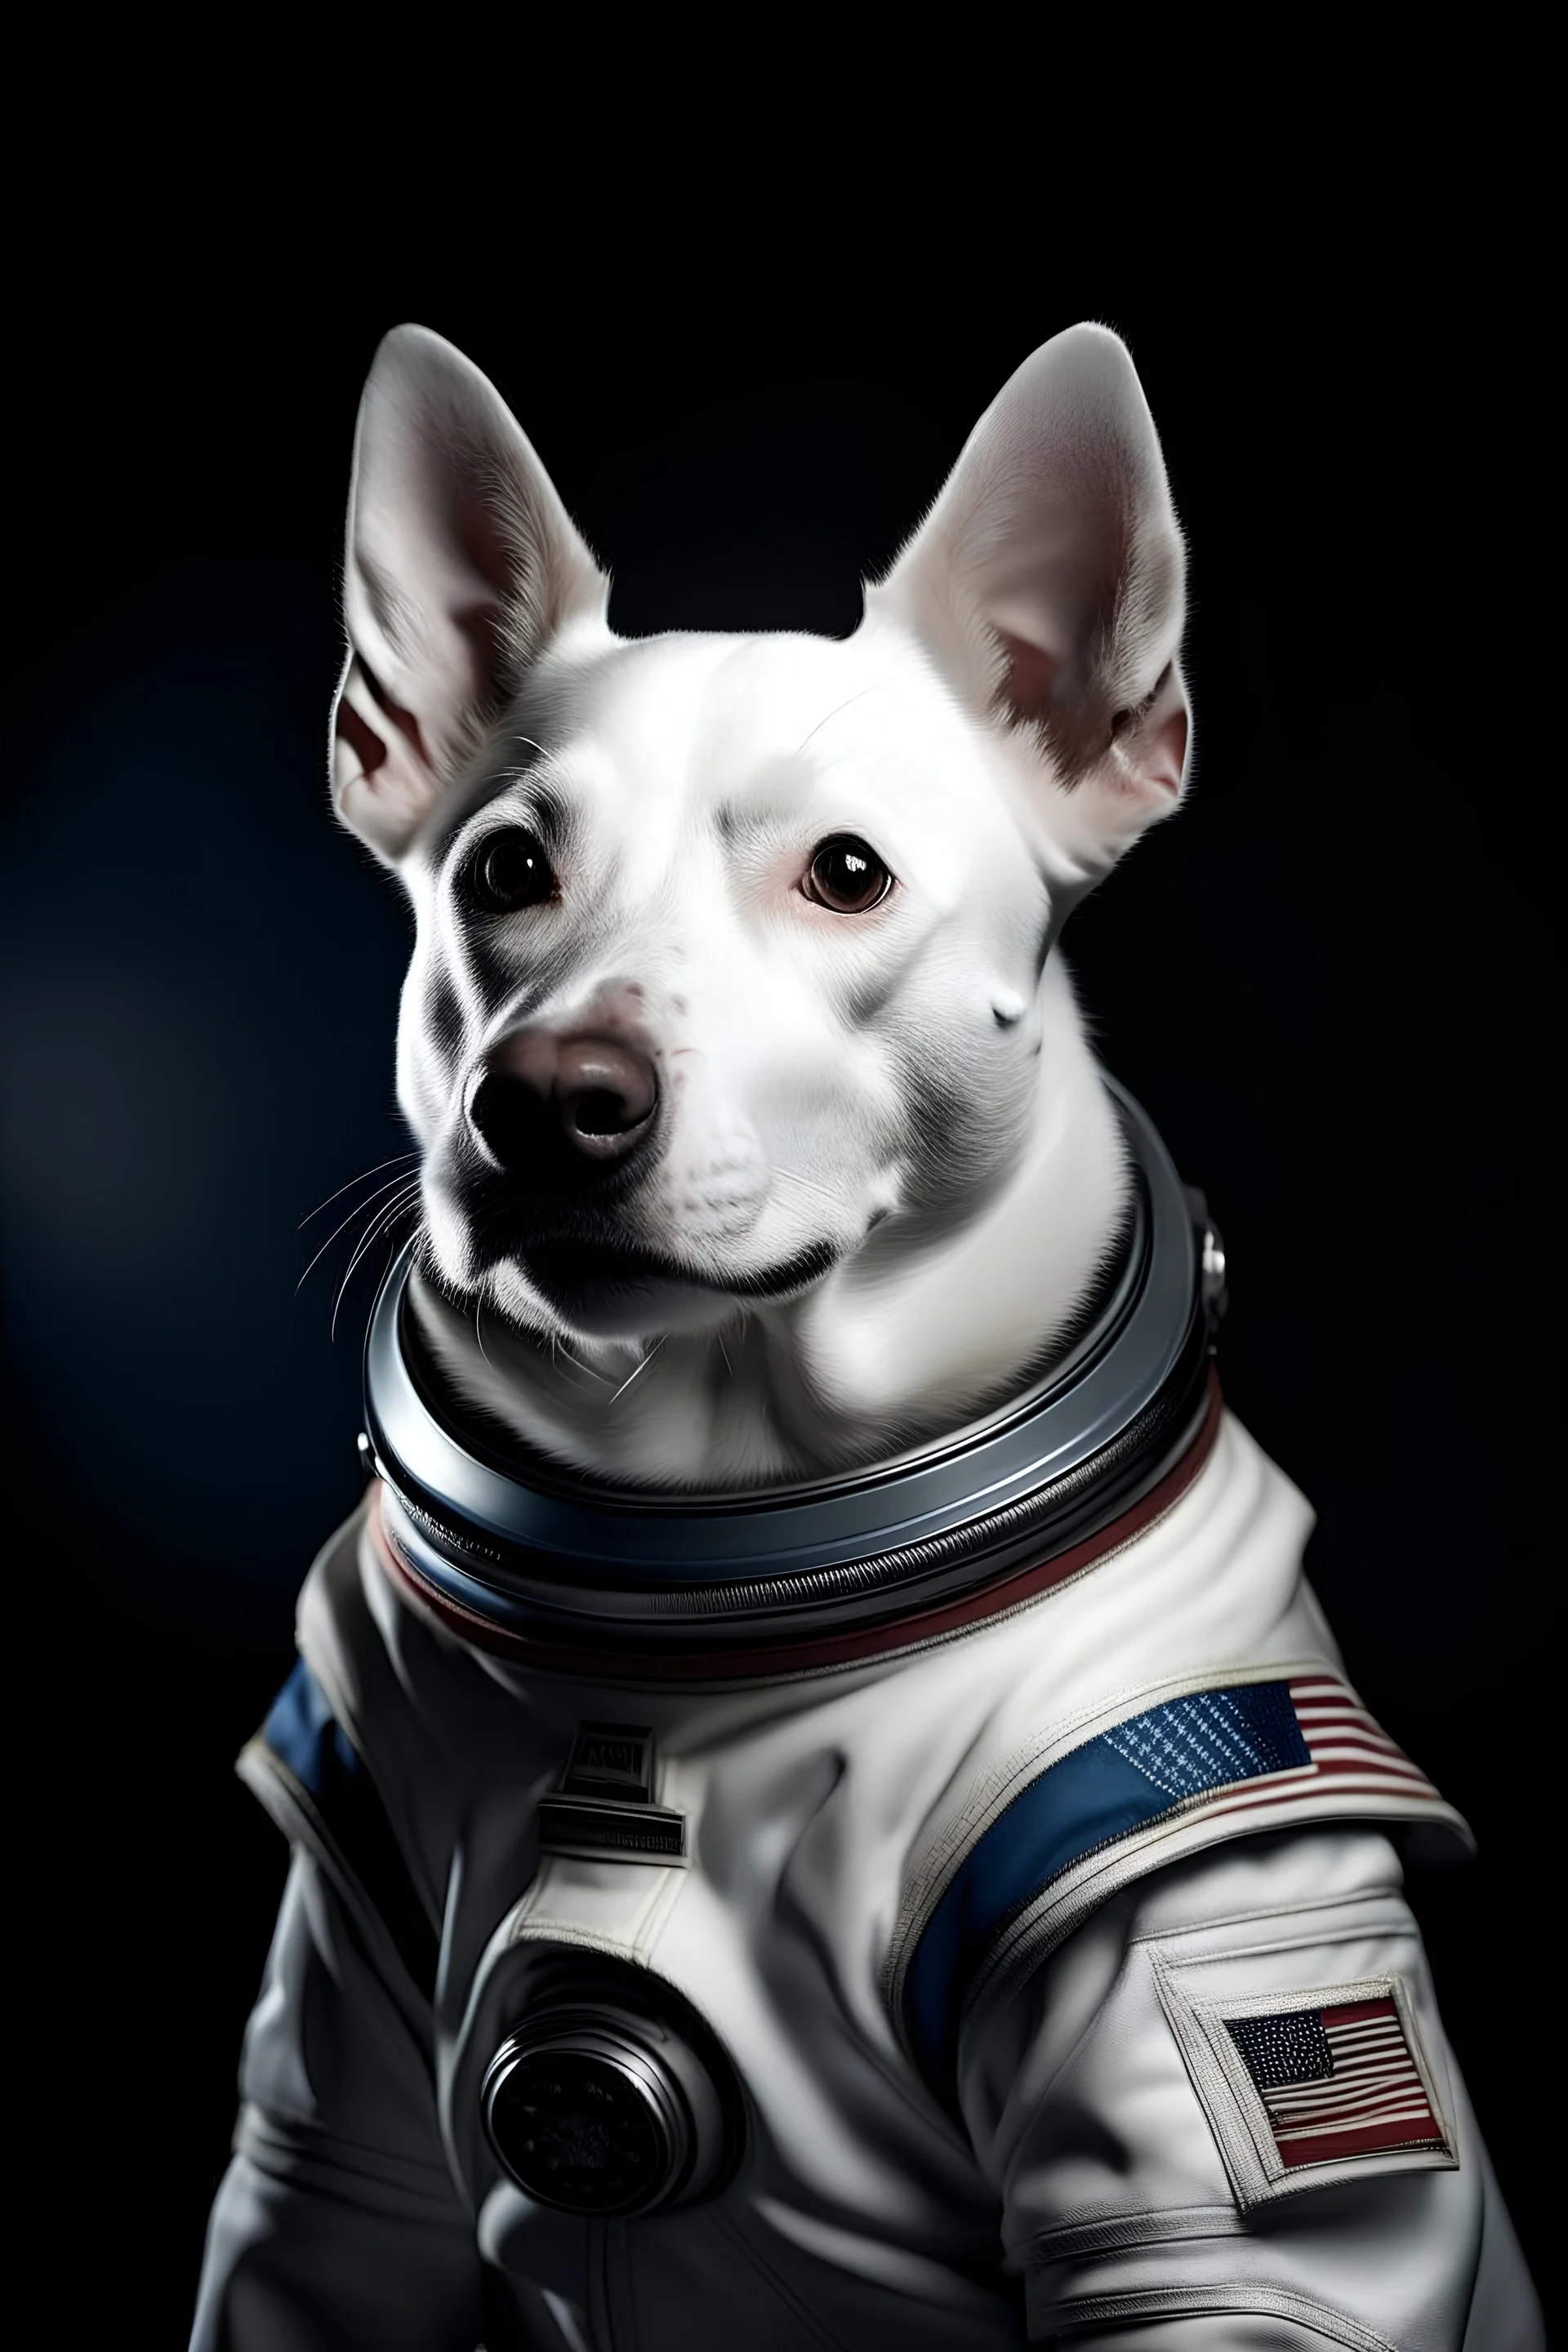 Portrait of a white dog with pointy ears in space wearing the US uniform